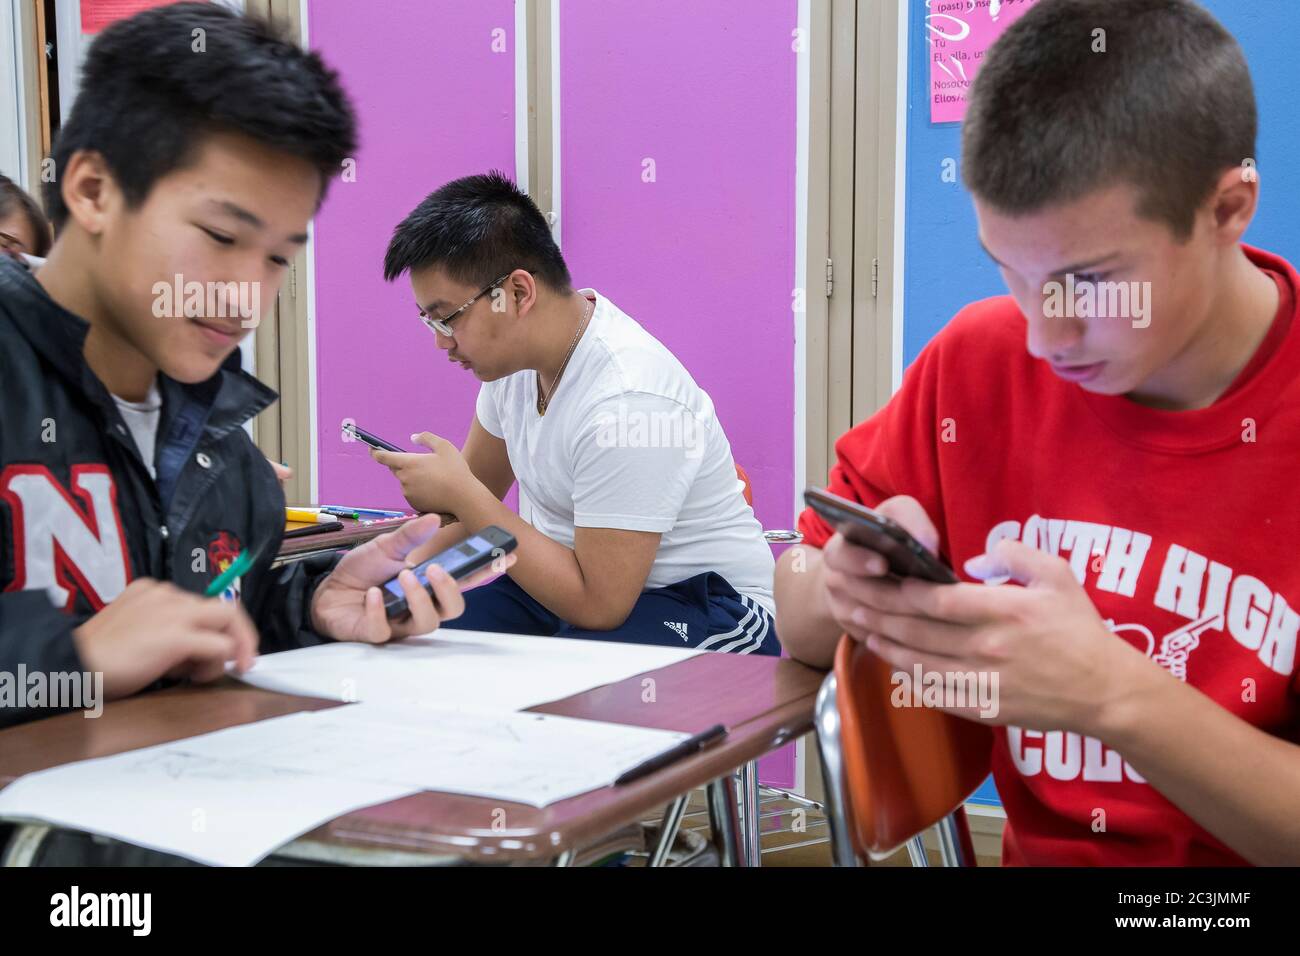 High school students working together in a classroom Stock Photo